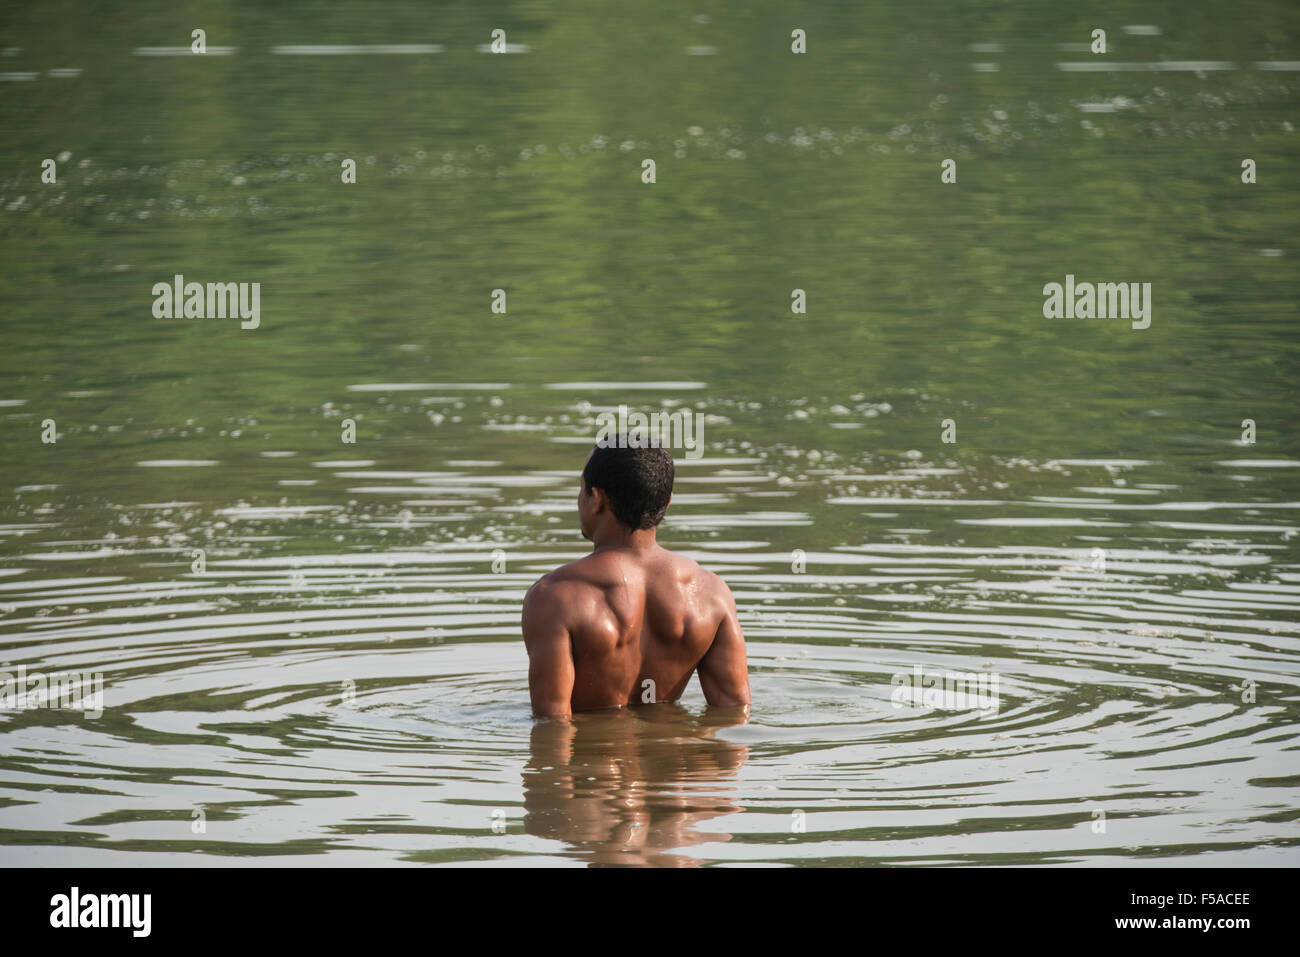 Palmas, Brazil. 30th October, 2015. A competitor acclimatises in the water before the men's swimming race at the International Indigenous Games, in the city of Palmas, Tocantins State, Brazil. Credit:  Sue Cunningham Photographic/Alamy Live News Stock Photo